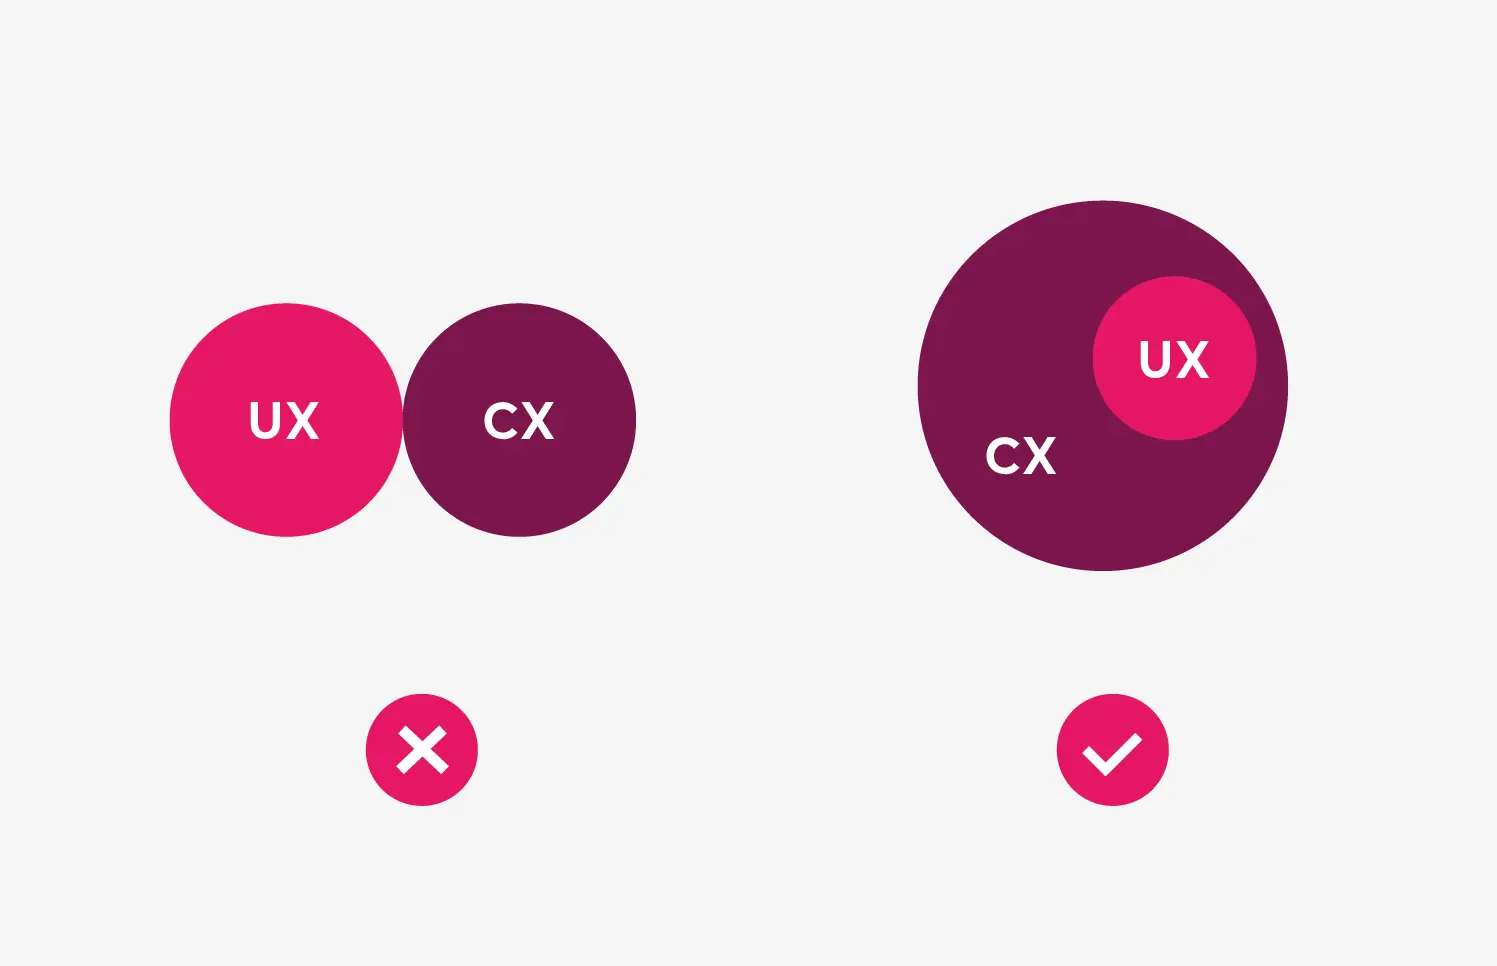 Diagram comparing User Experience (UX) and Customer Experience (CX) with overlapping circles